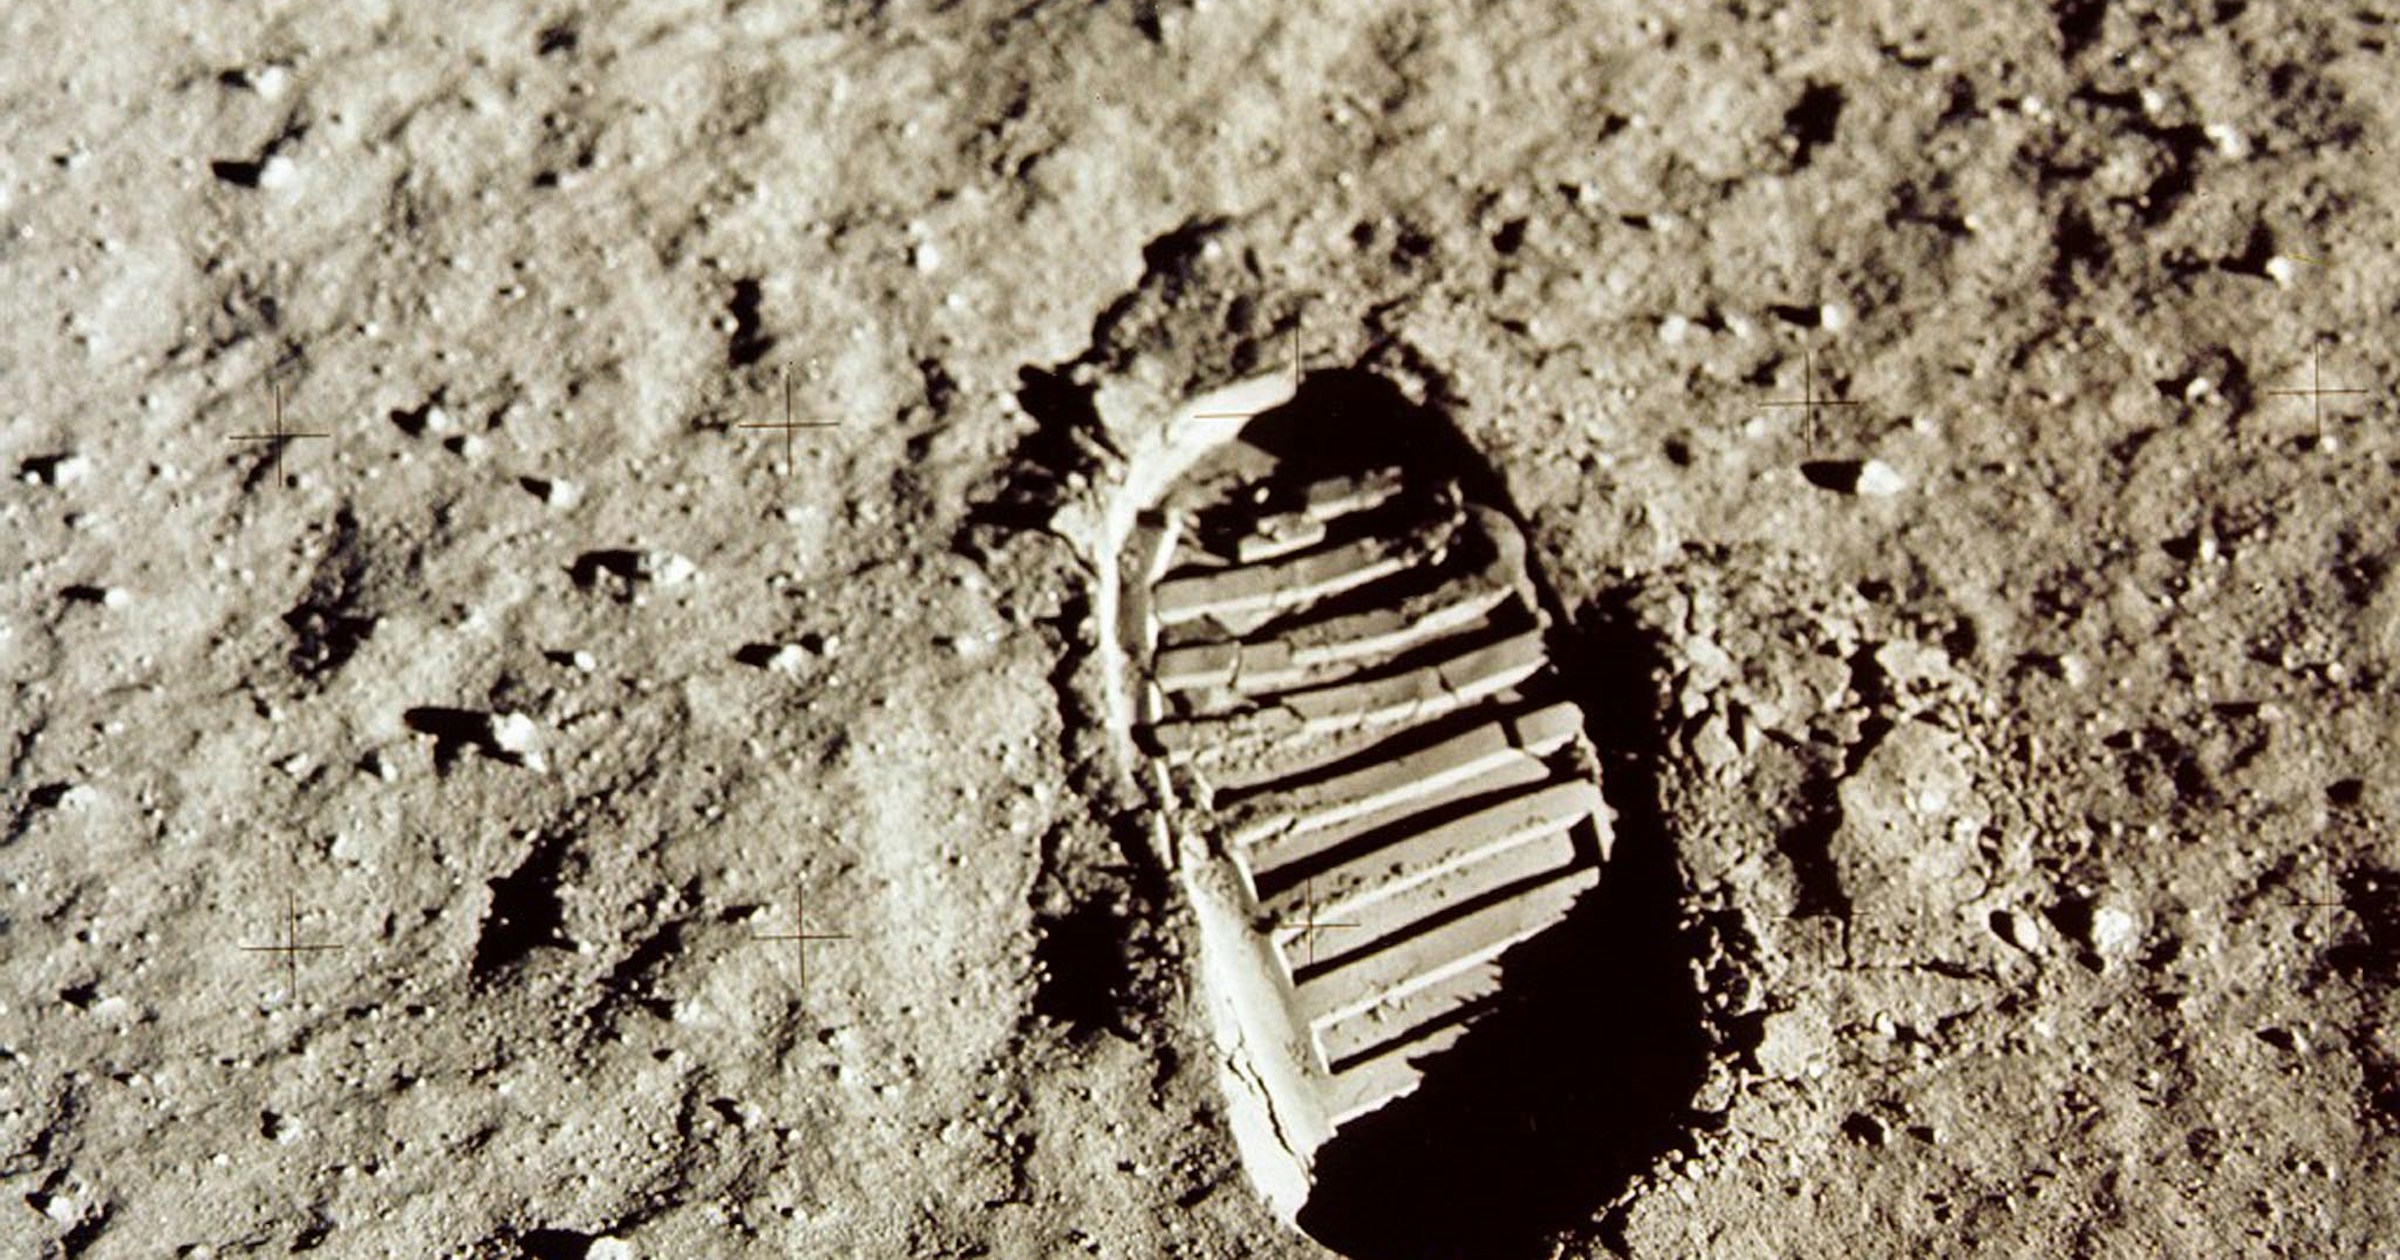 To counter climate change, lunar dust may protect the Earth from the sun’s rays